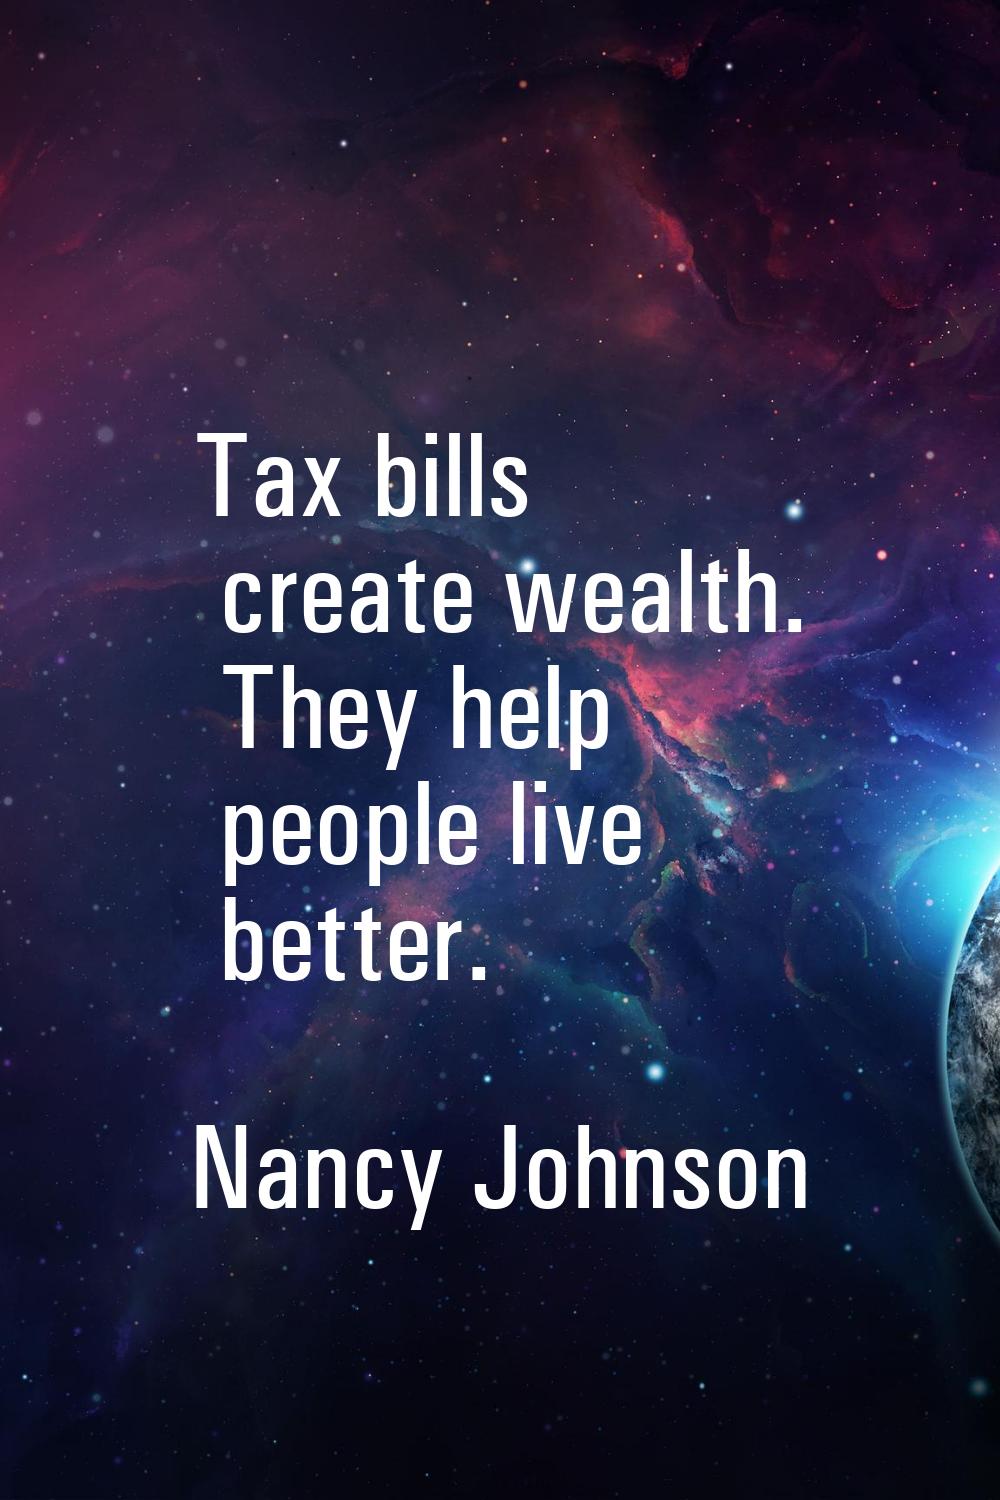 Tax bills create wealth. They help people live better.